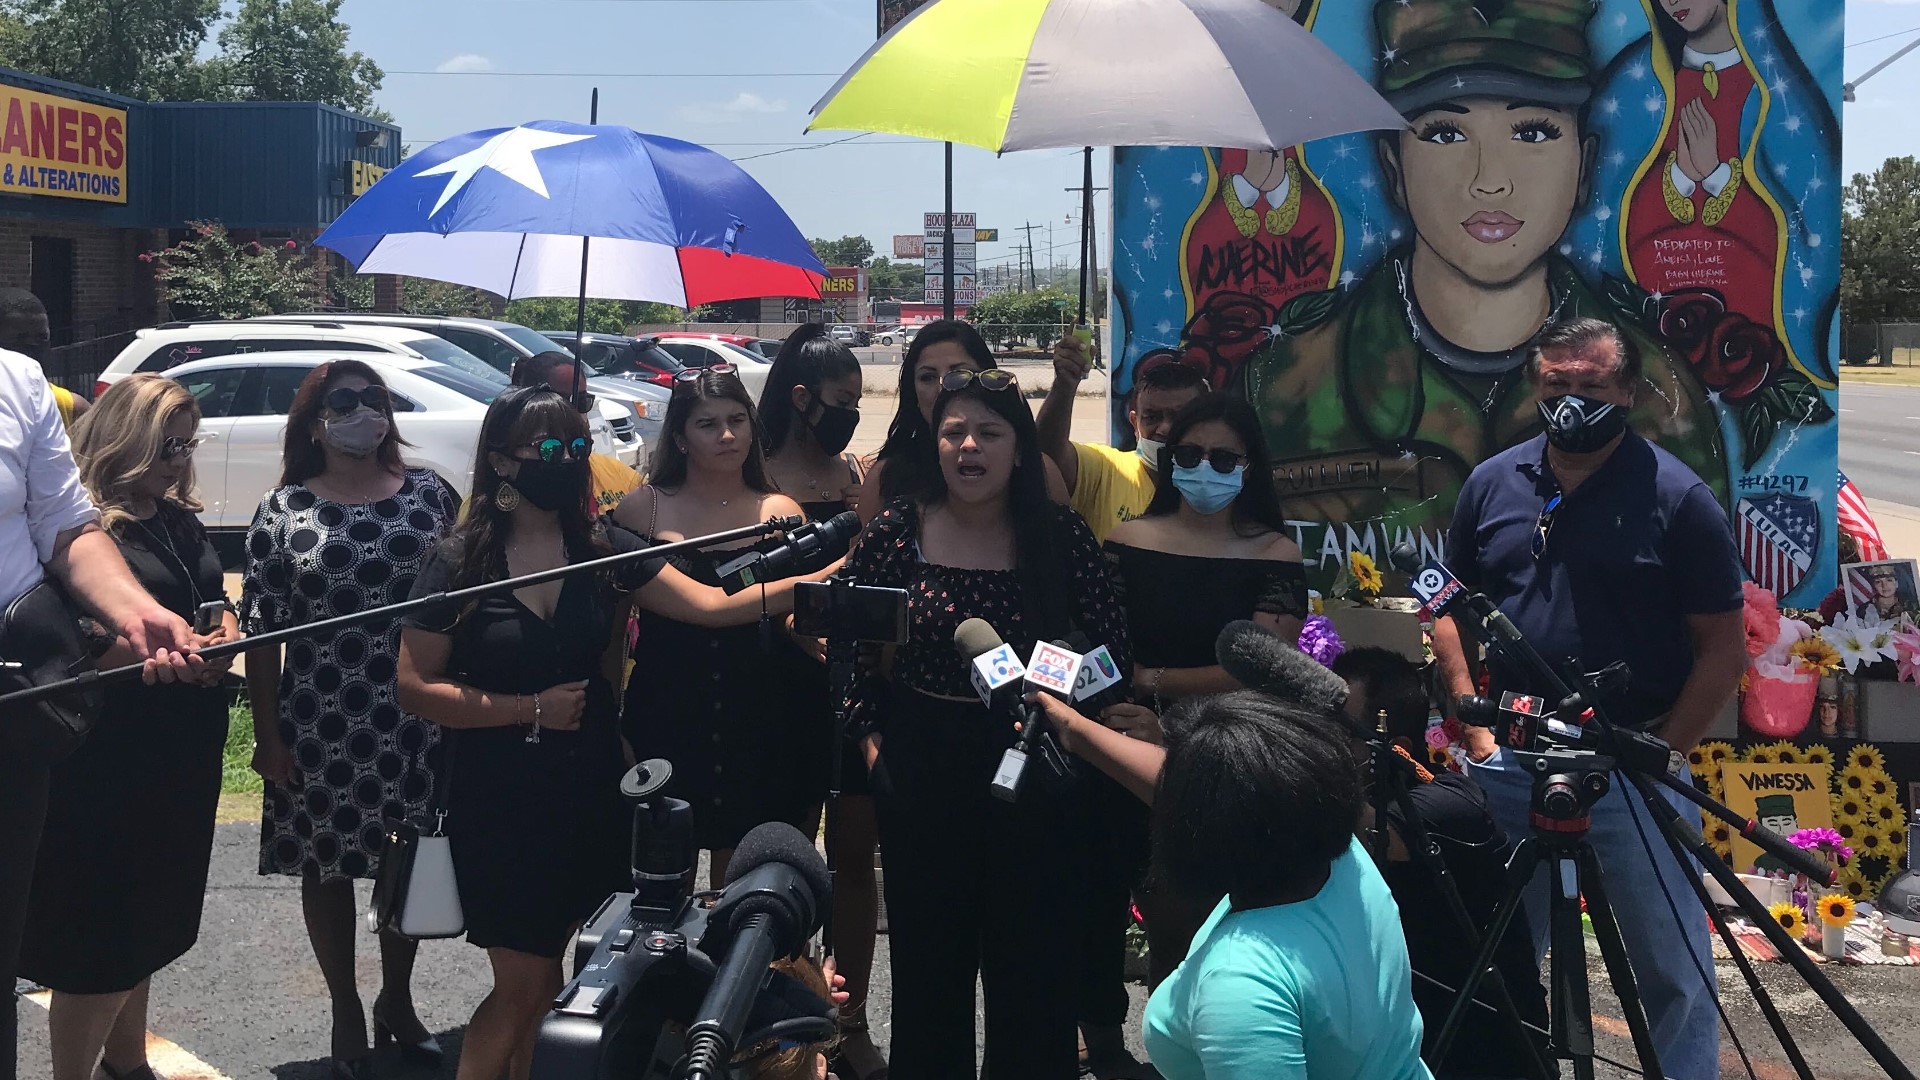 It's the first time Guillen's mother has been in the area since remains found were confirmed to be those of Spc. Guillen. Now, her mother is praying for change.